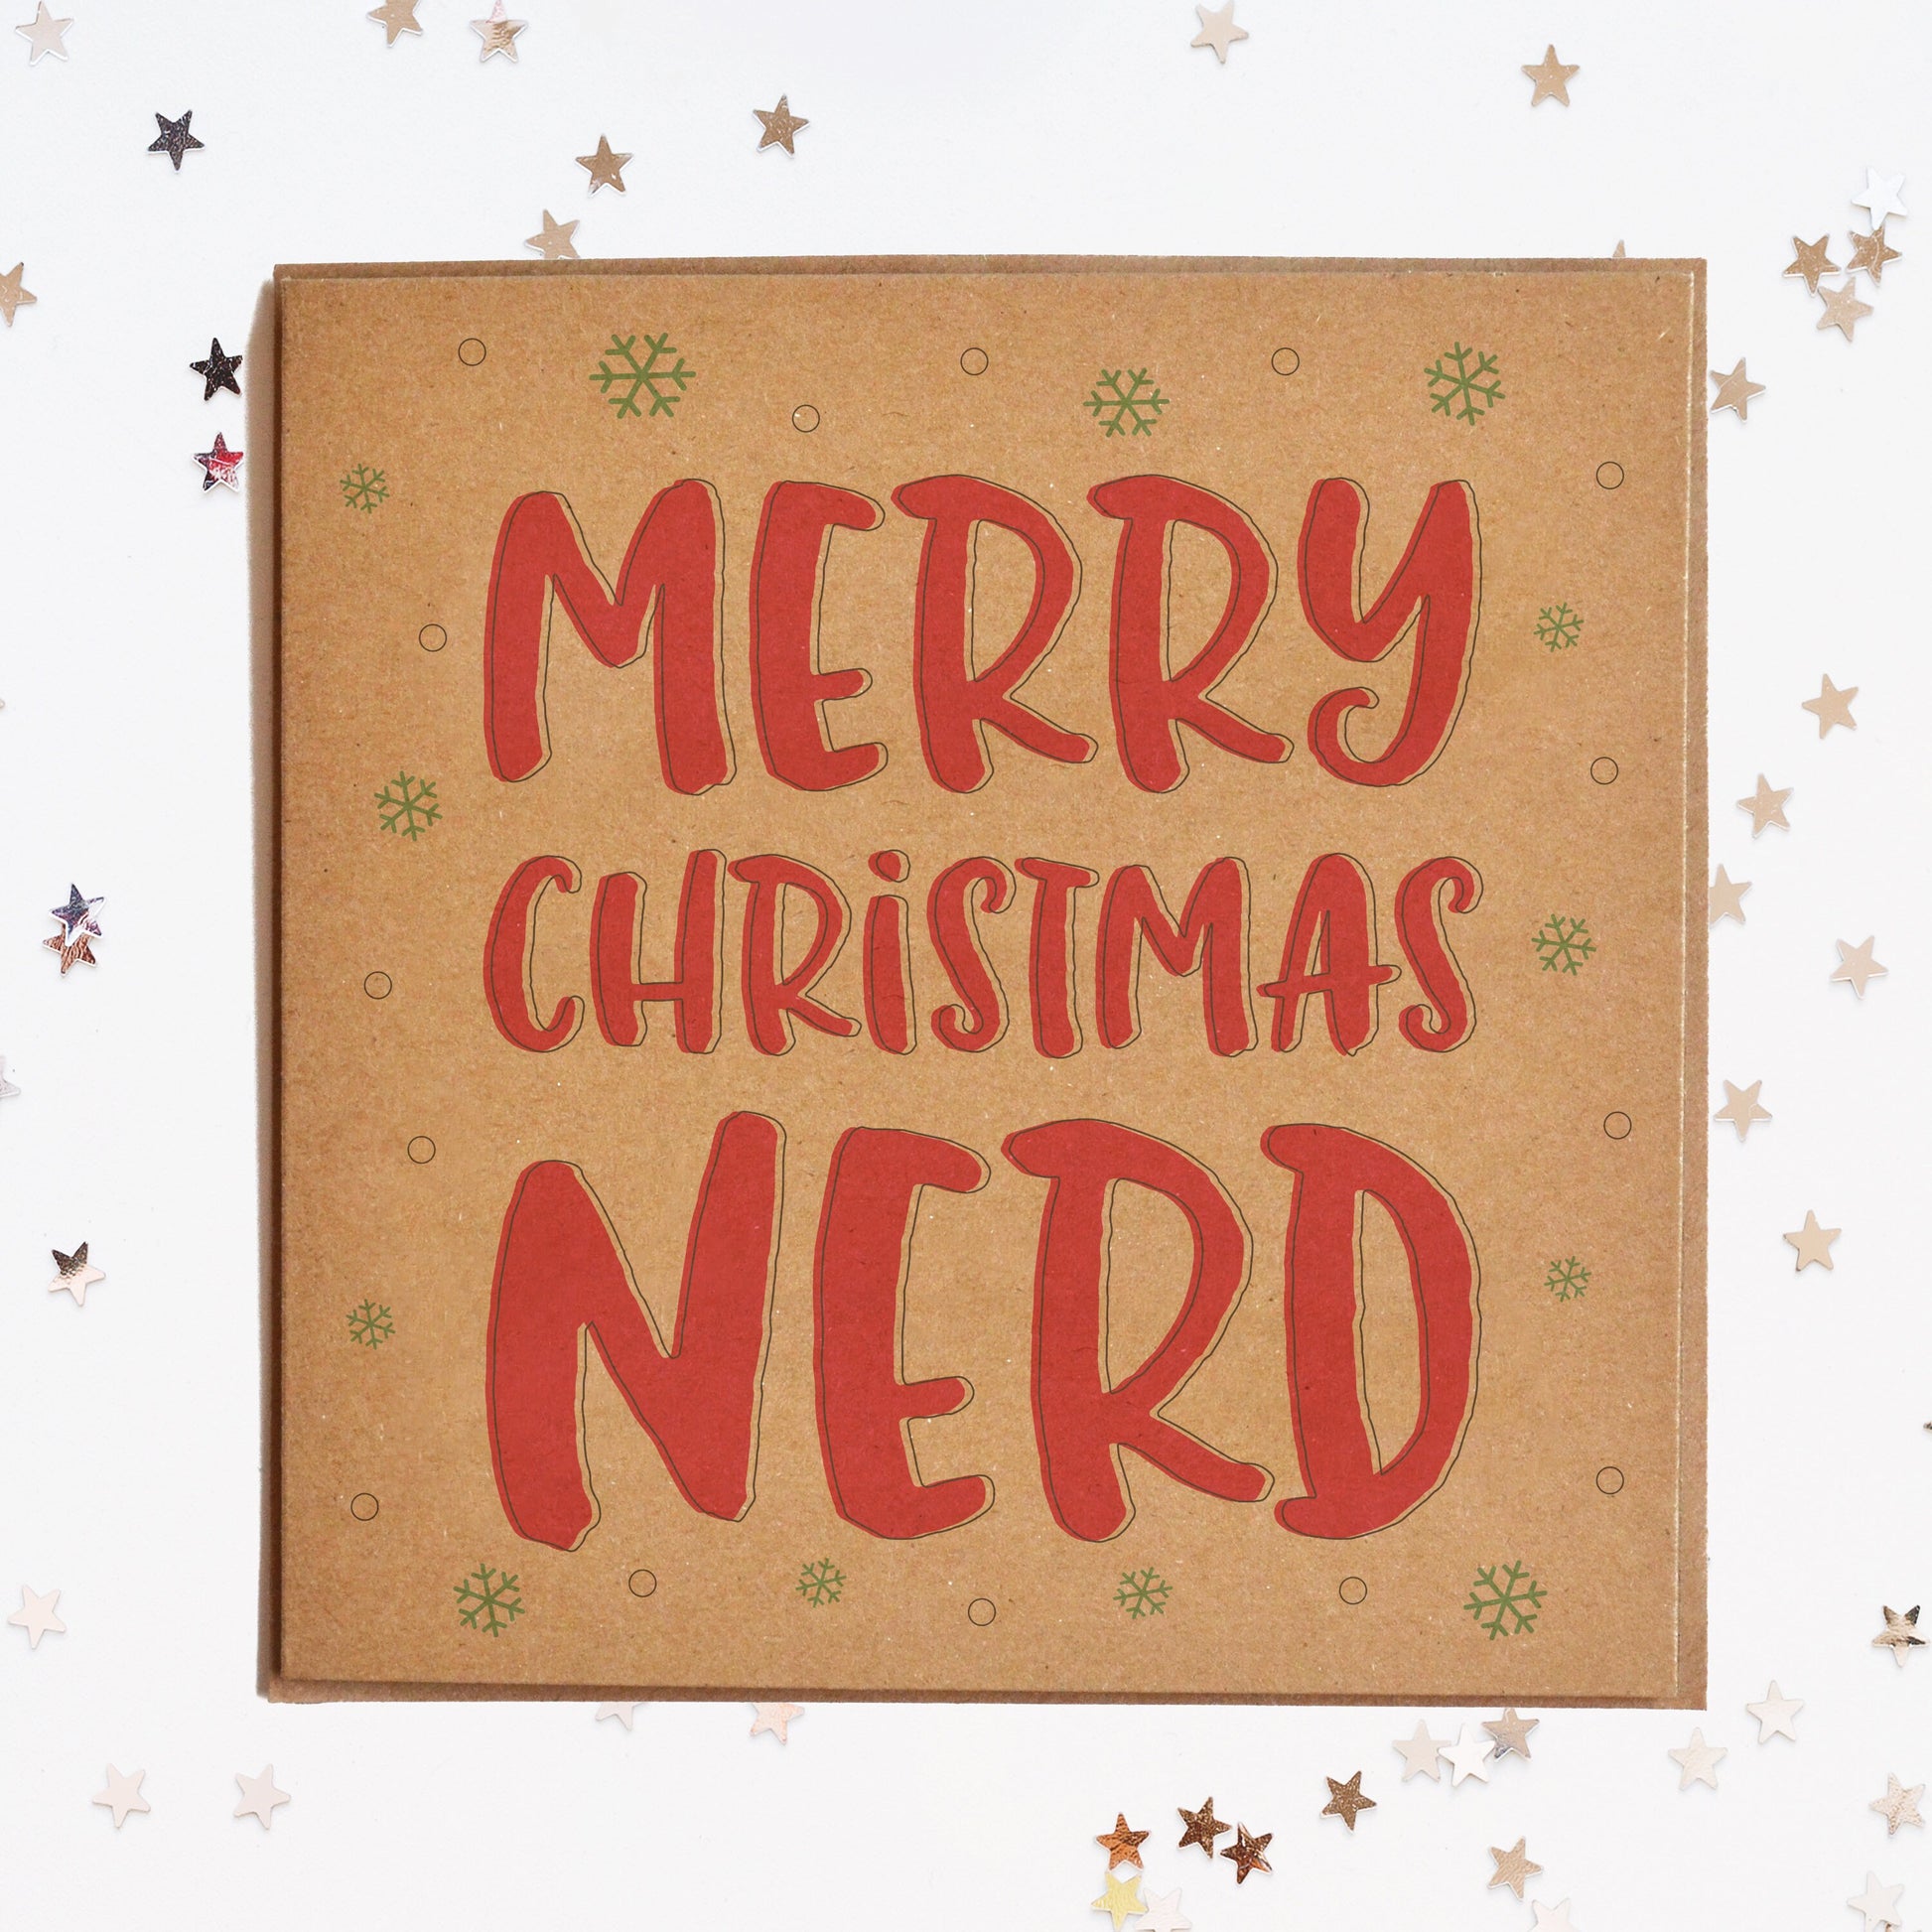 A funny Christmas card in festive colours and the message "Merry Christmas Nerd" surrounded by decorative snowflakes.